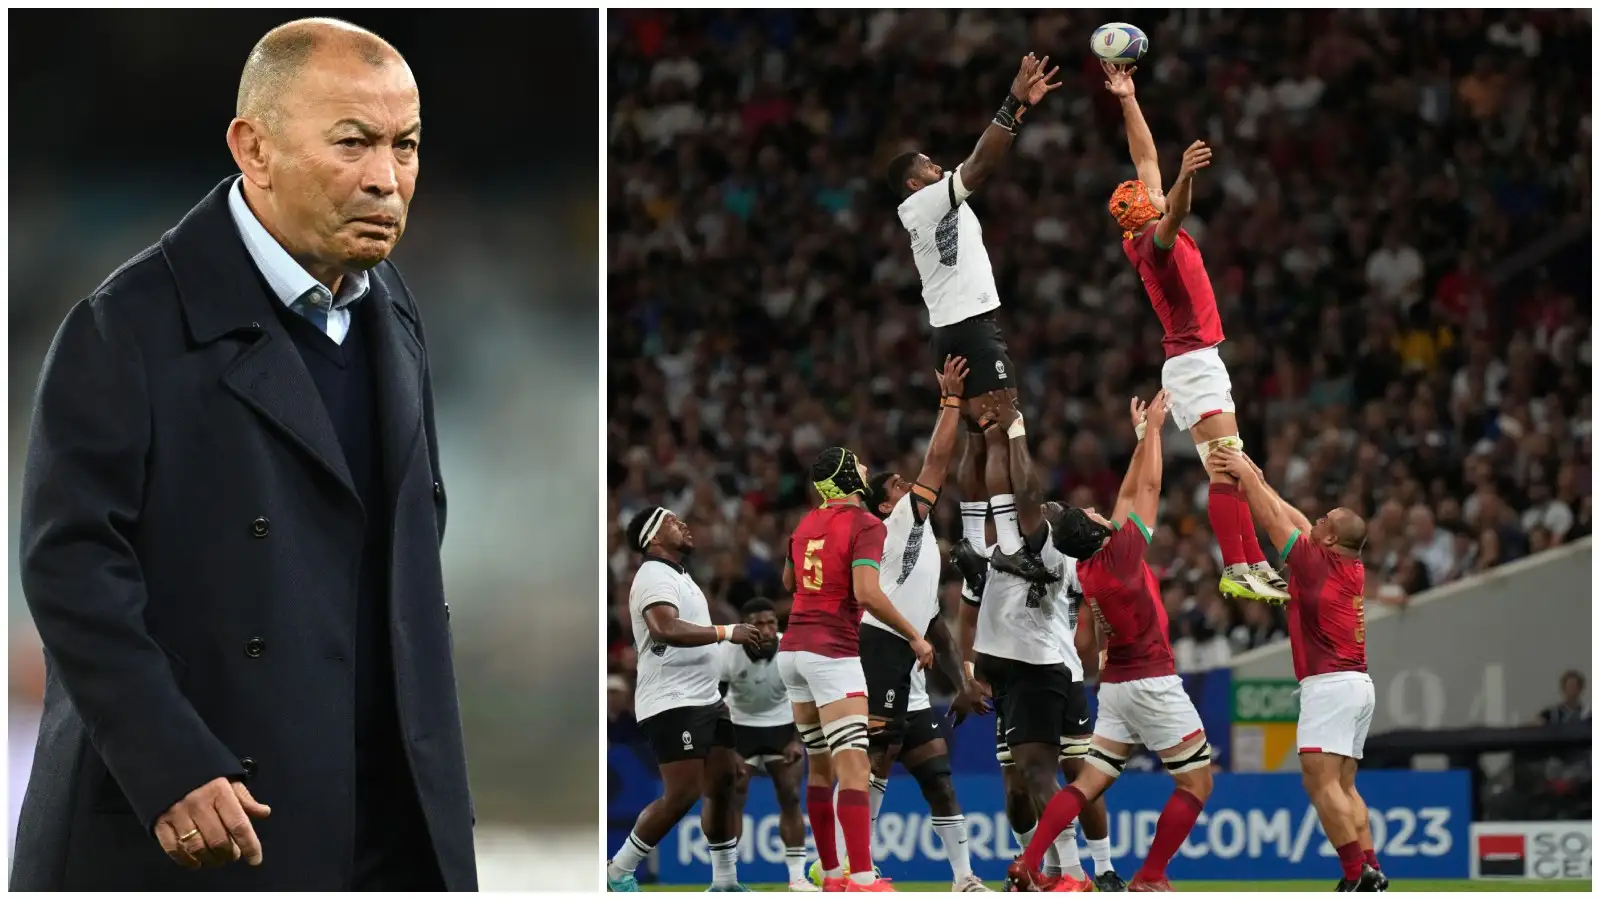 Eddie Jones and the vacant international teams looking for a head coach.